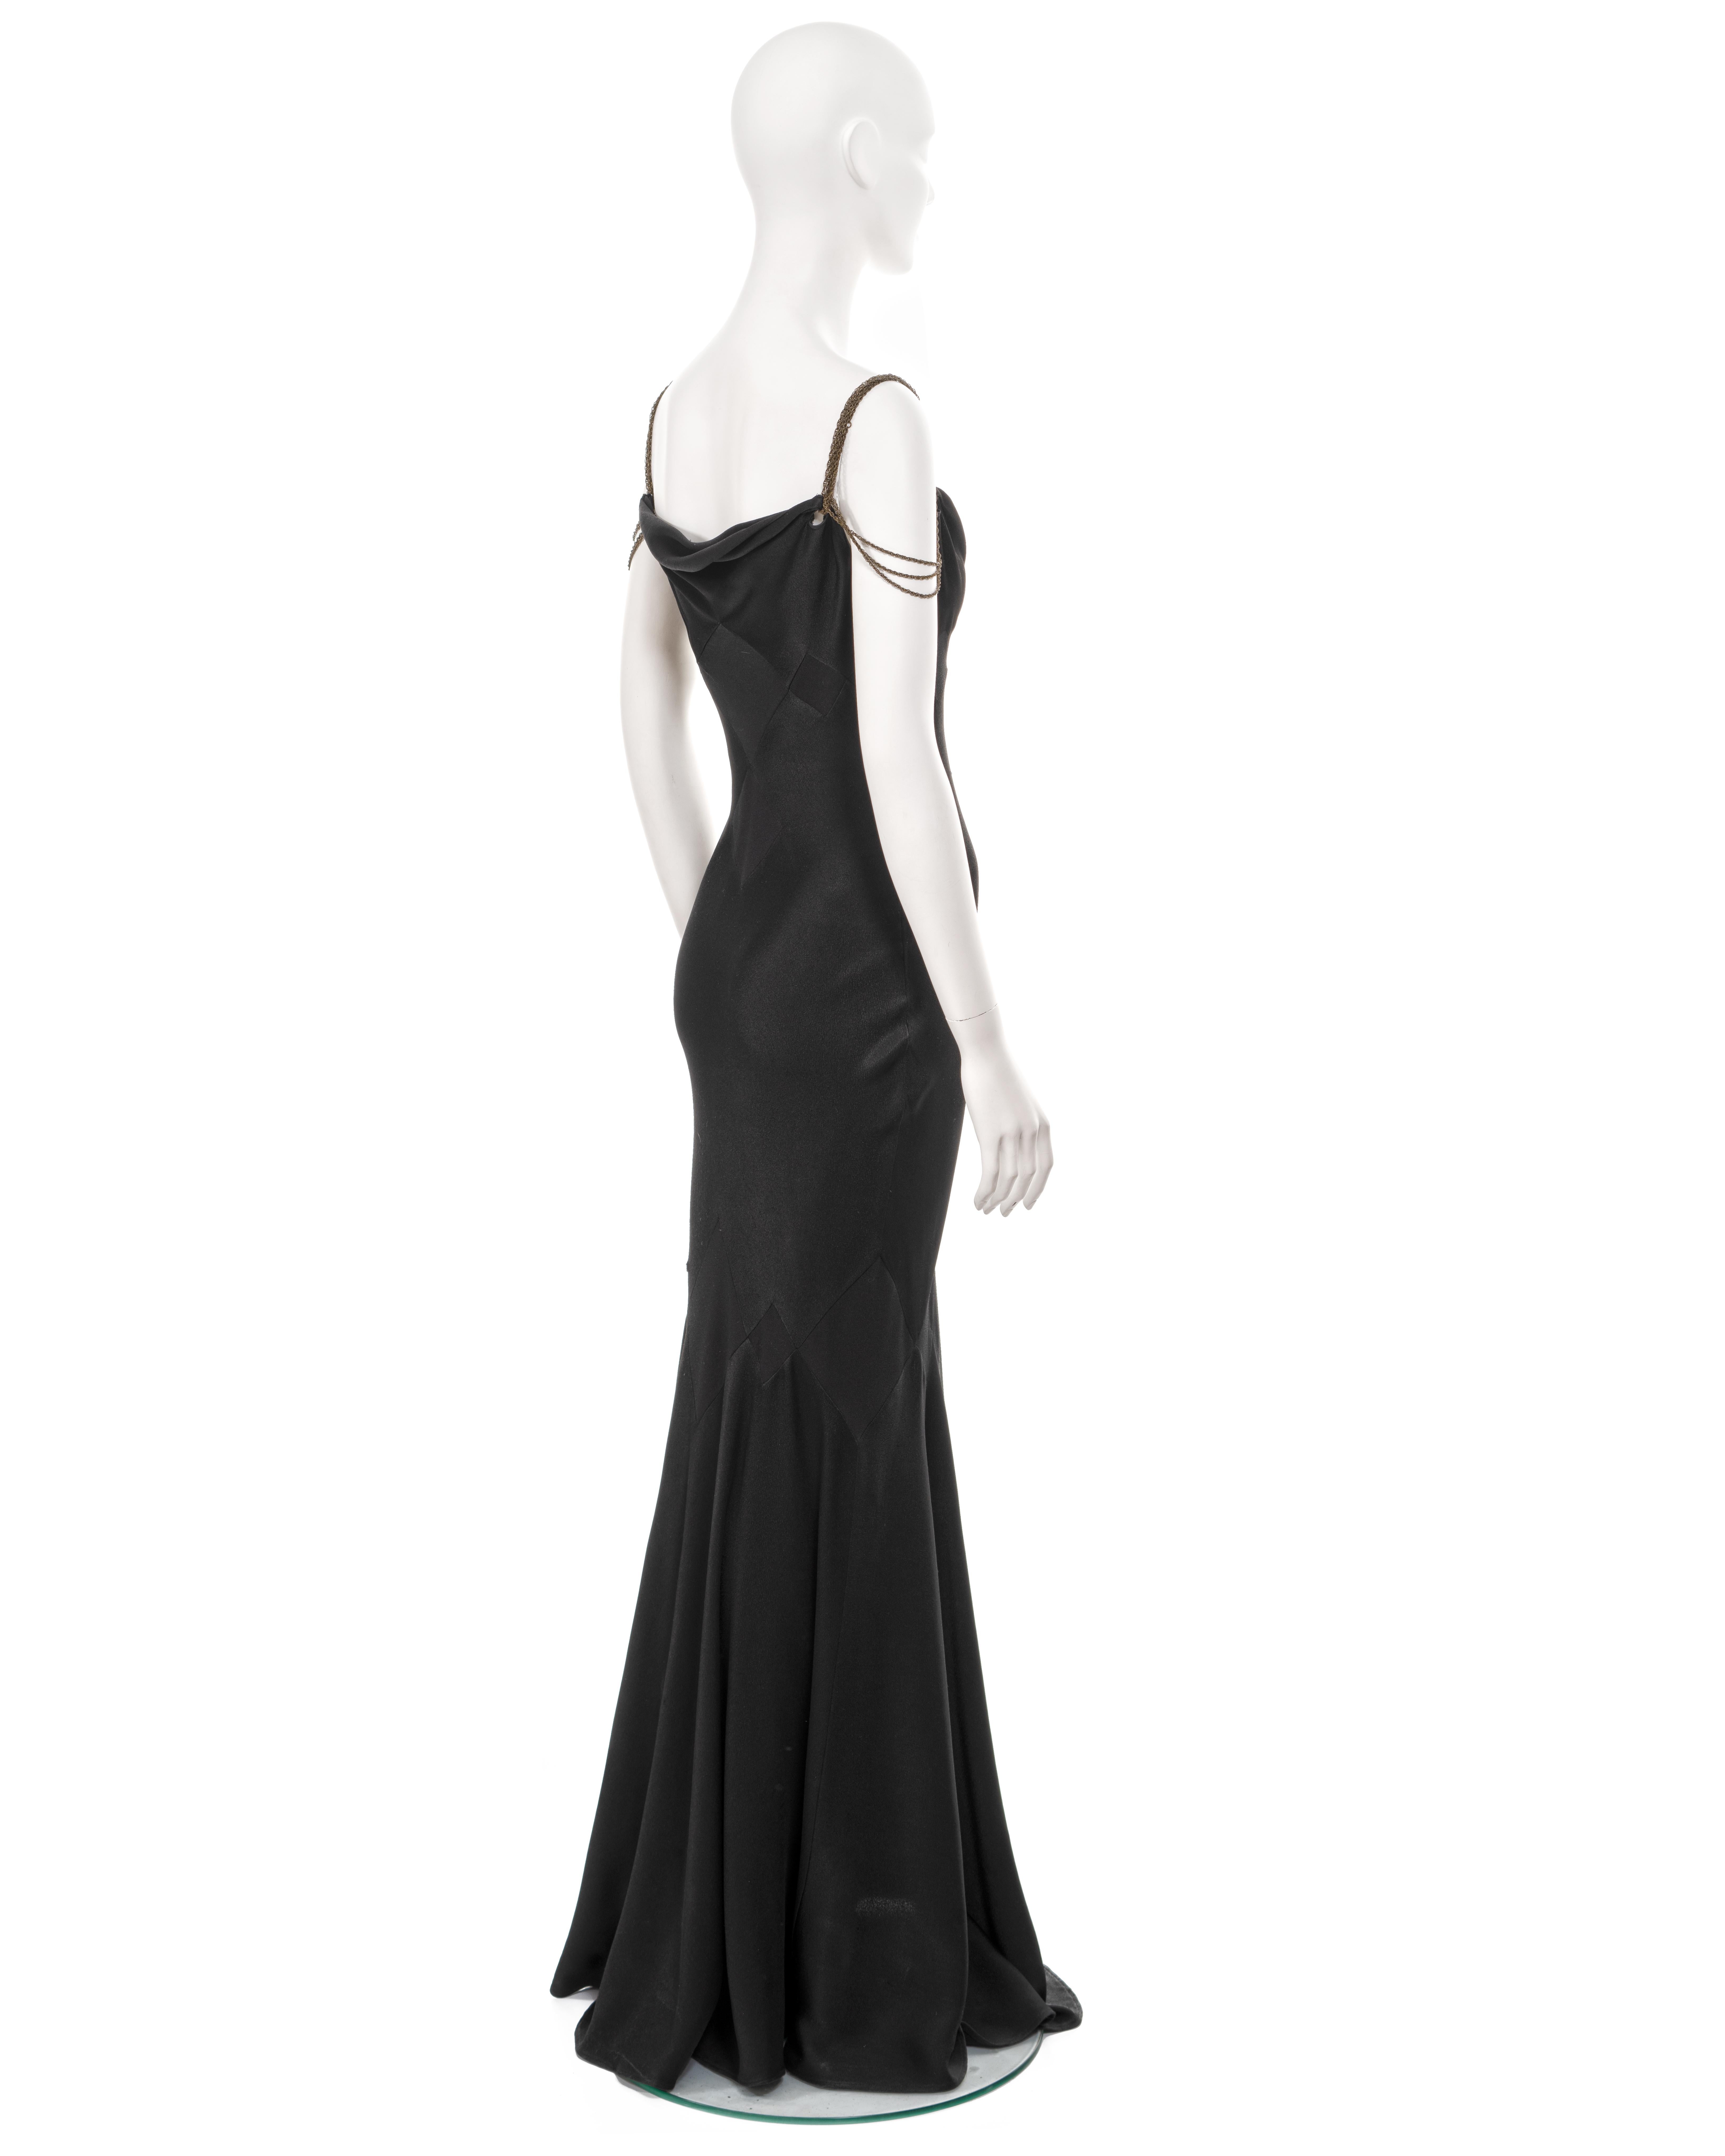 John Galliano black bias-cut satin evening dress with chain straps, ss 2002 For Sale 4